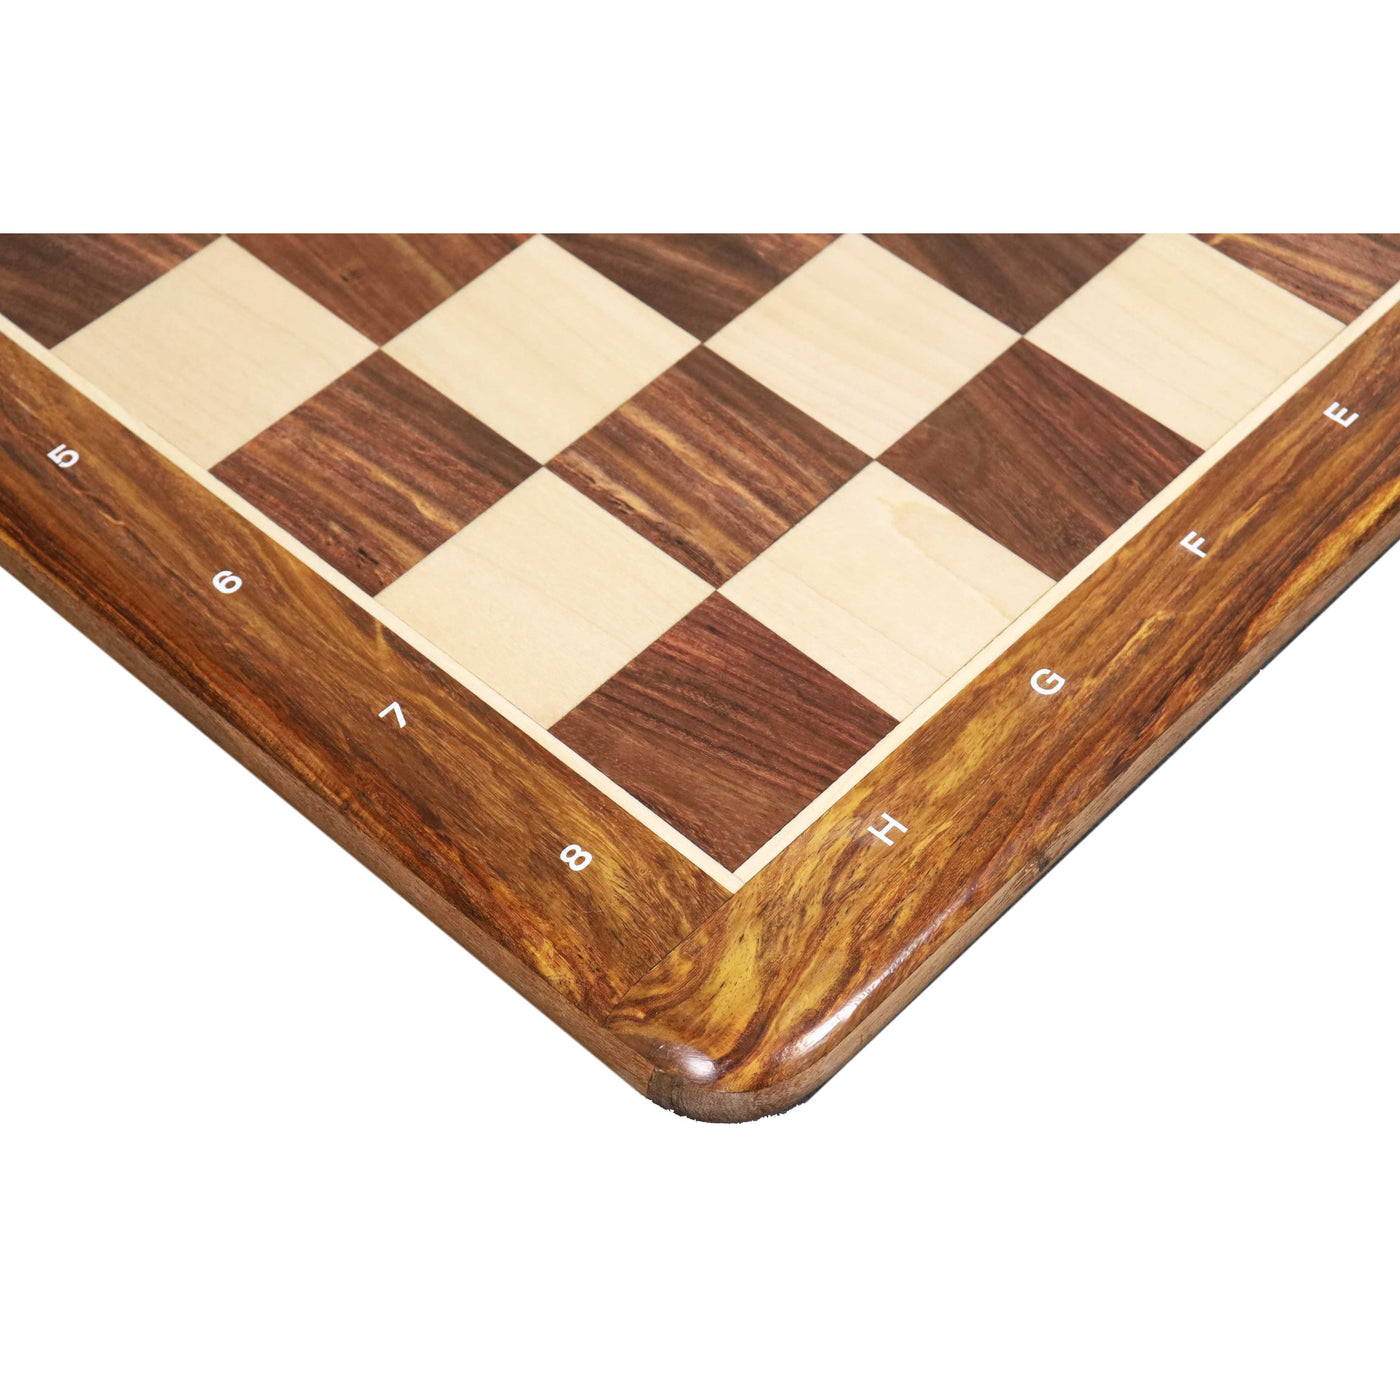 19" Golden Rosewood & Maple | Chessboard | Professional Chess Set